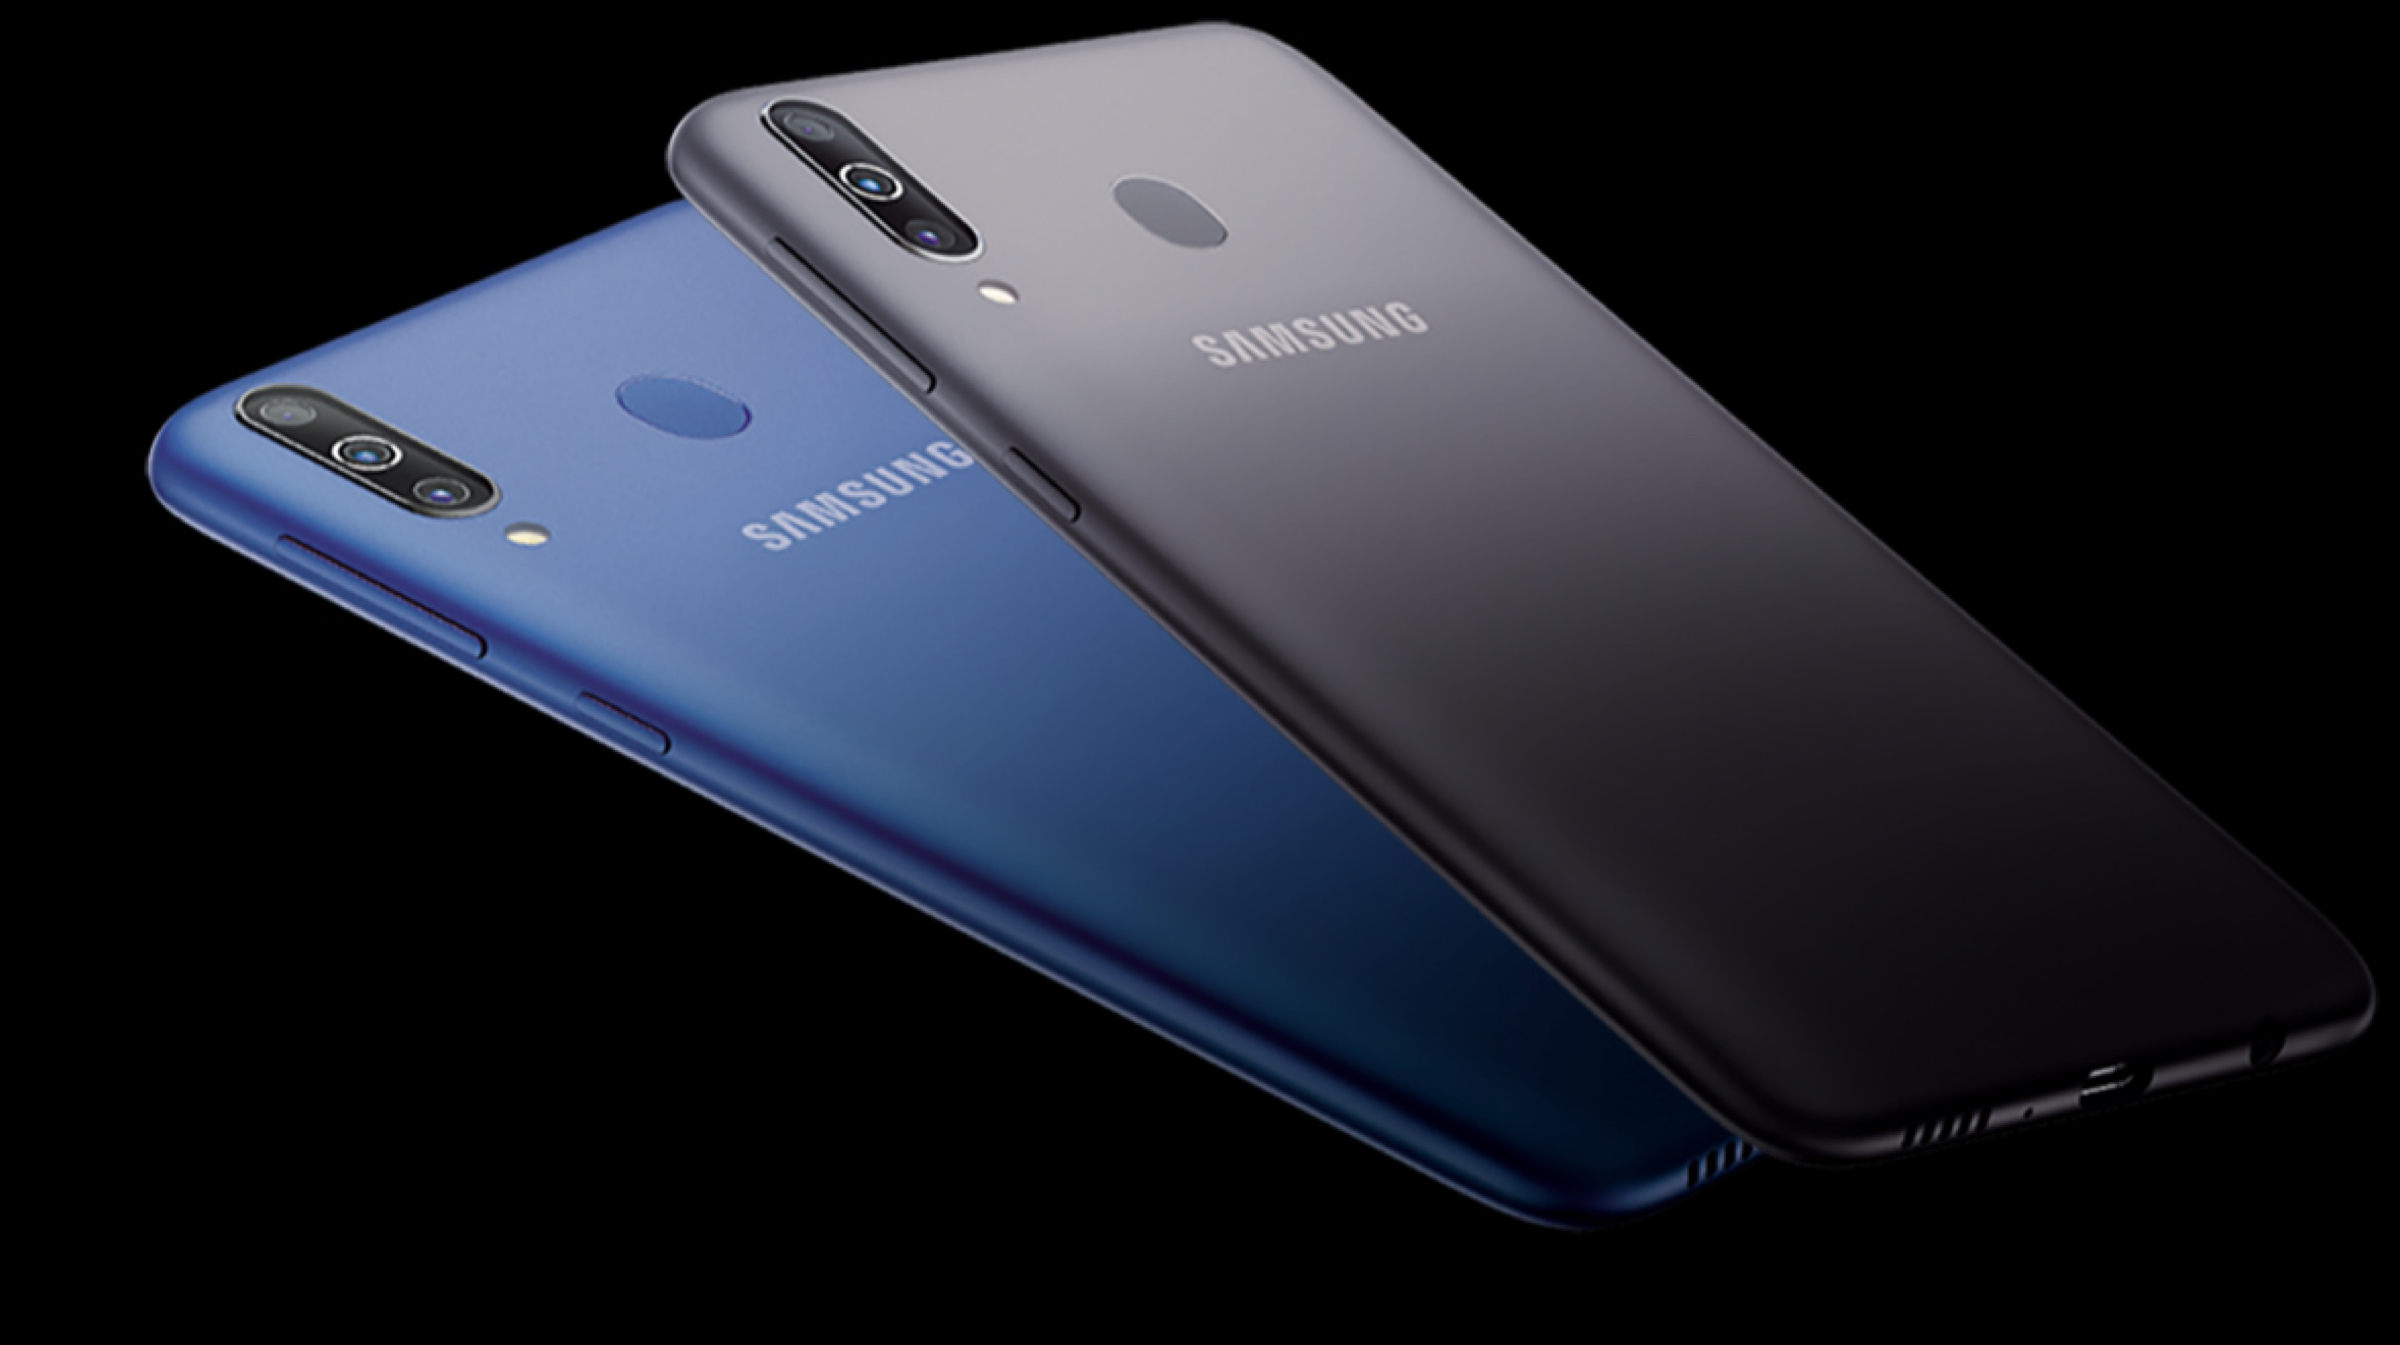 Samsung Launches The Galaxy M30 In India Laptrinhx